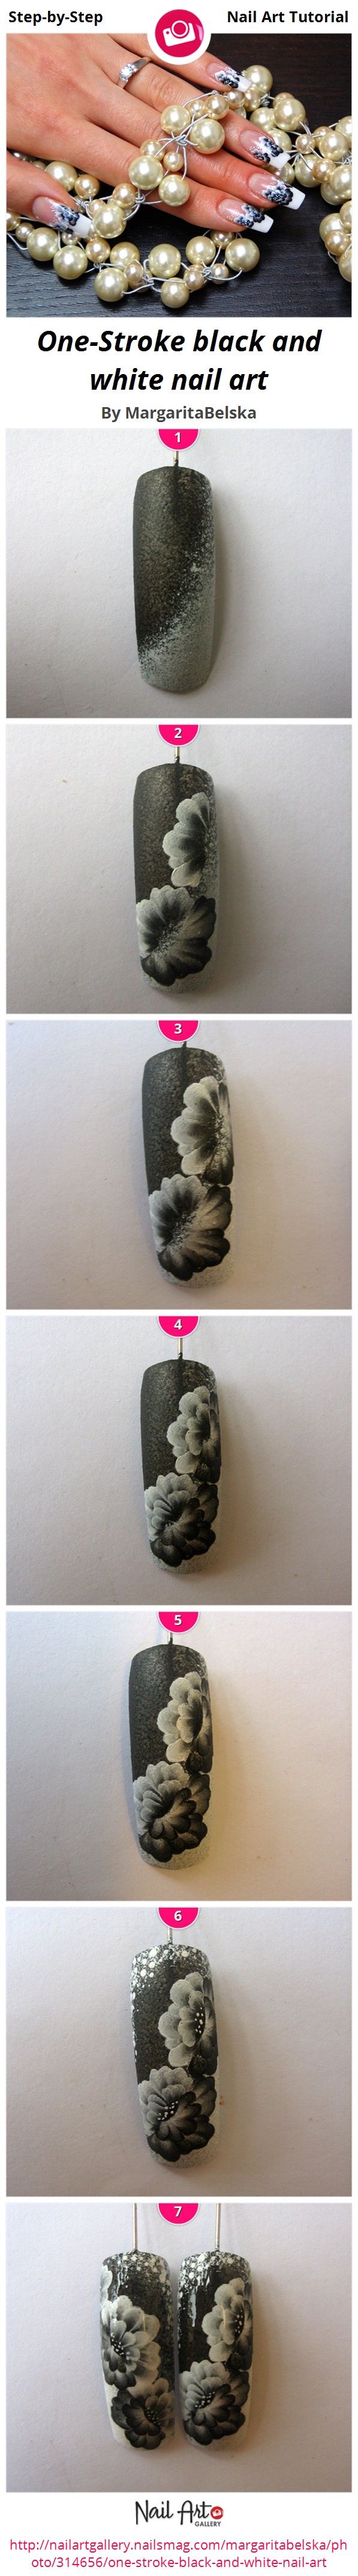 One-Stroke black and white nail art - Nail Art Gallery